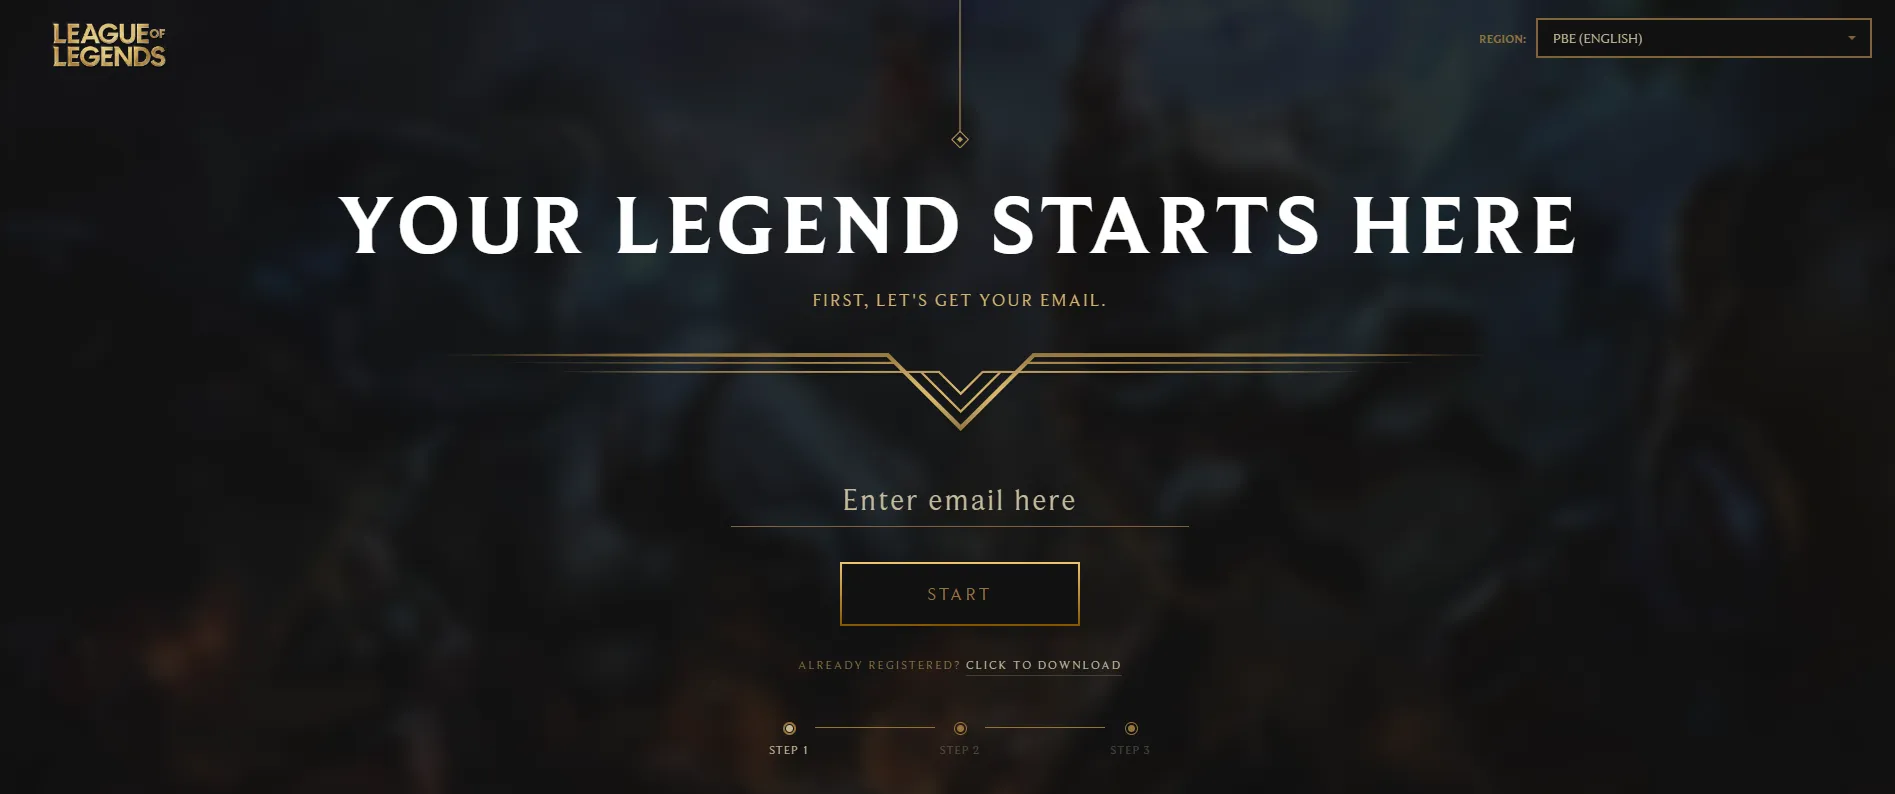 How to Play the League of Legends PBE